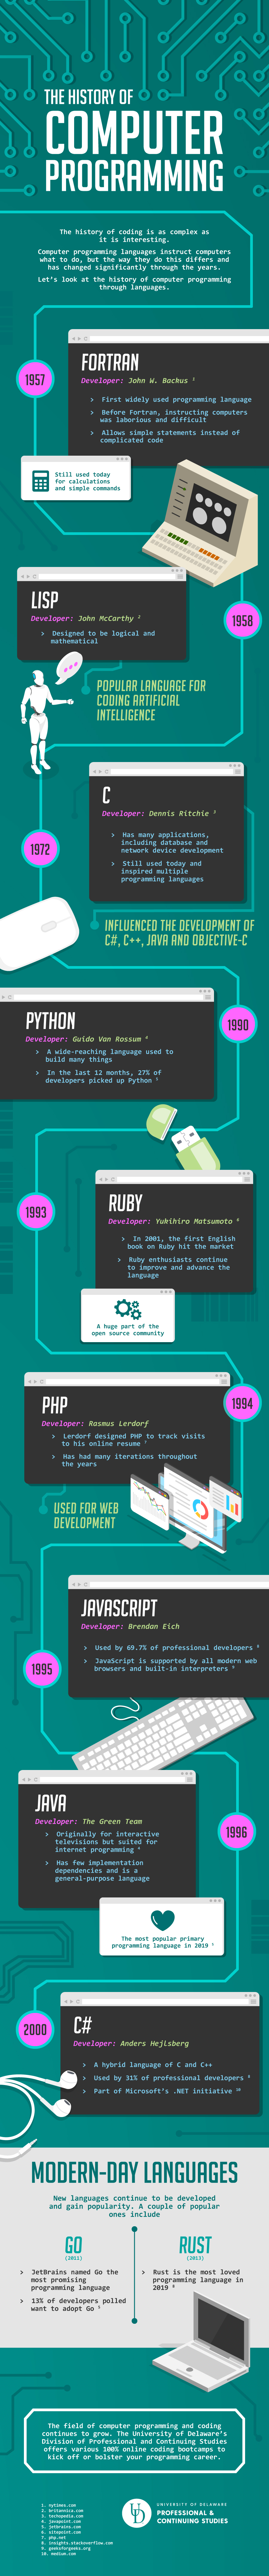 very lengthy history of computer programming infographic